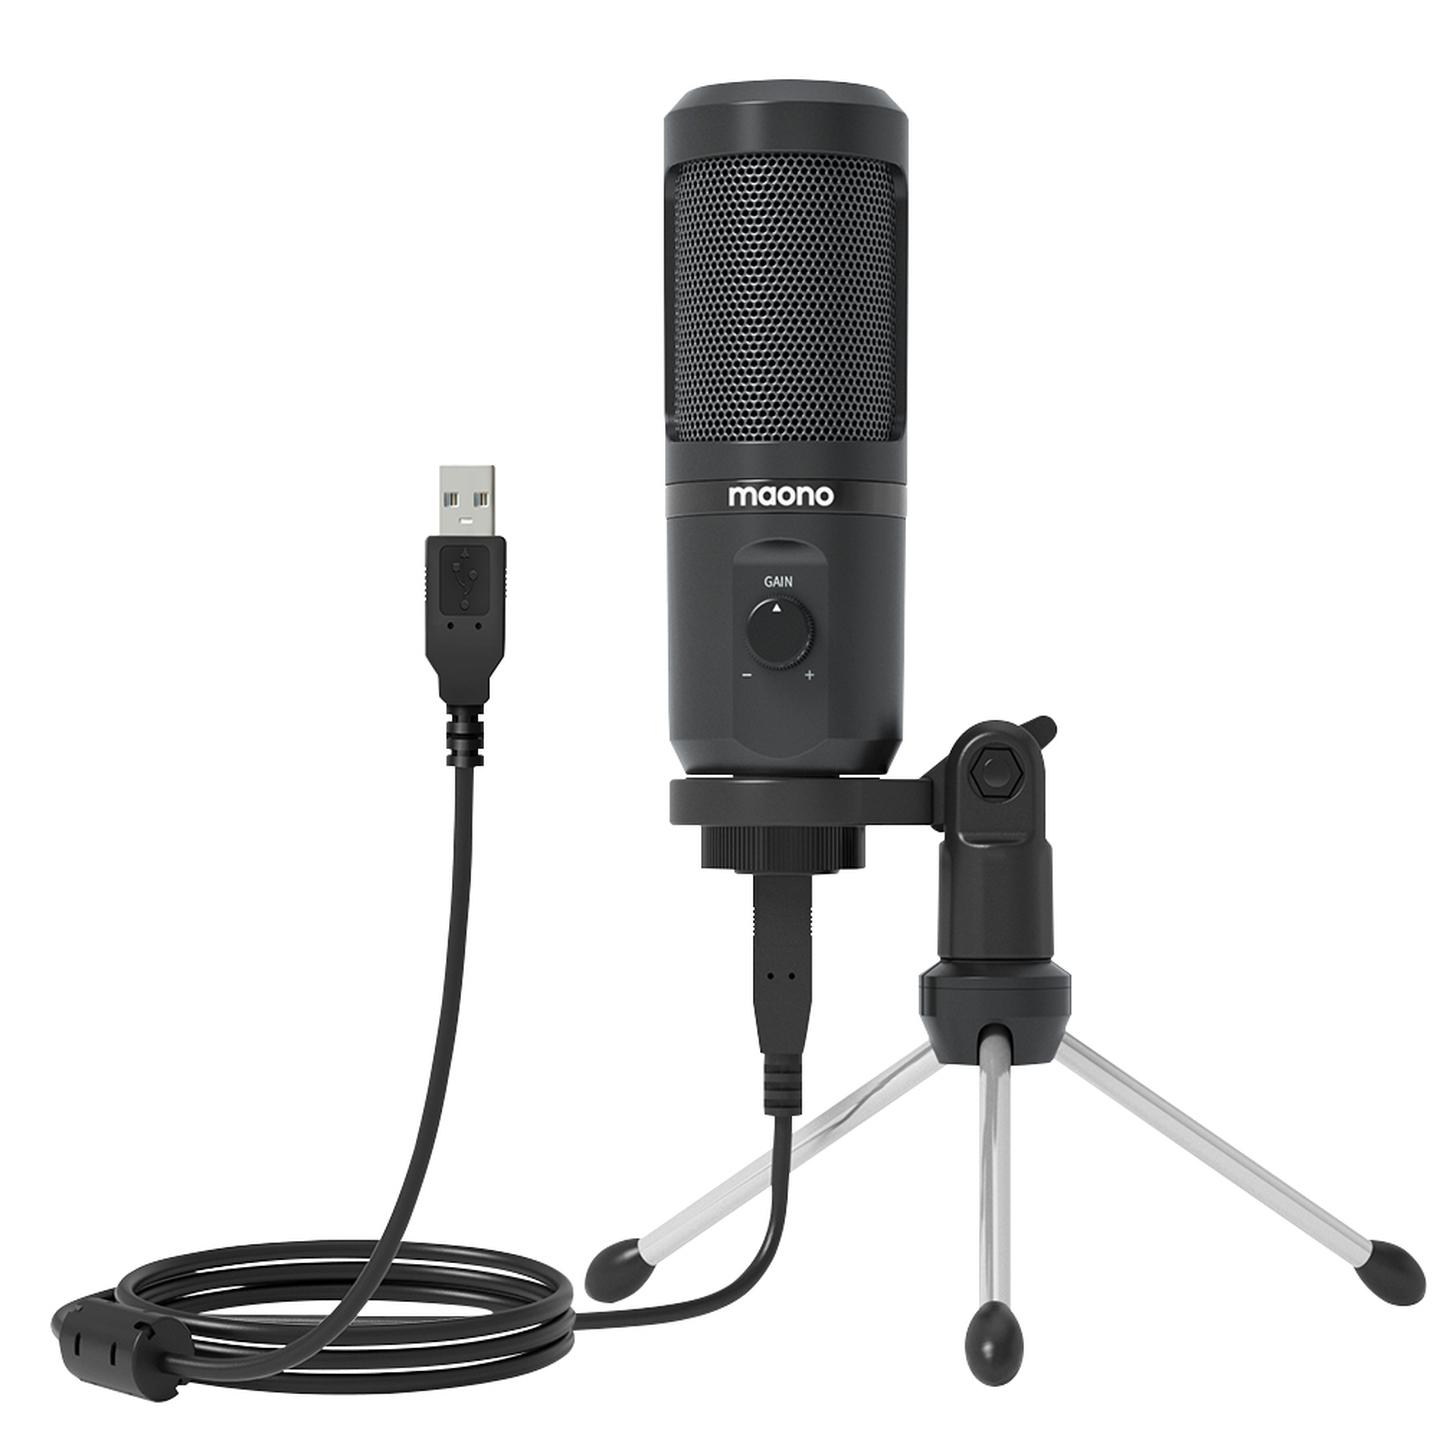 Maono USB Gaming Microphone with Mic Gain Control with Tripod Desk Stand